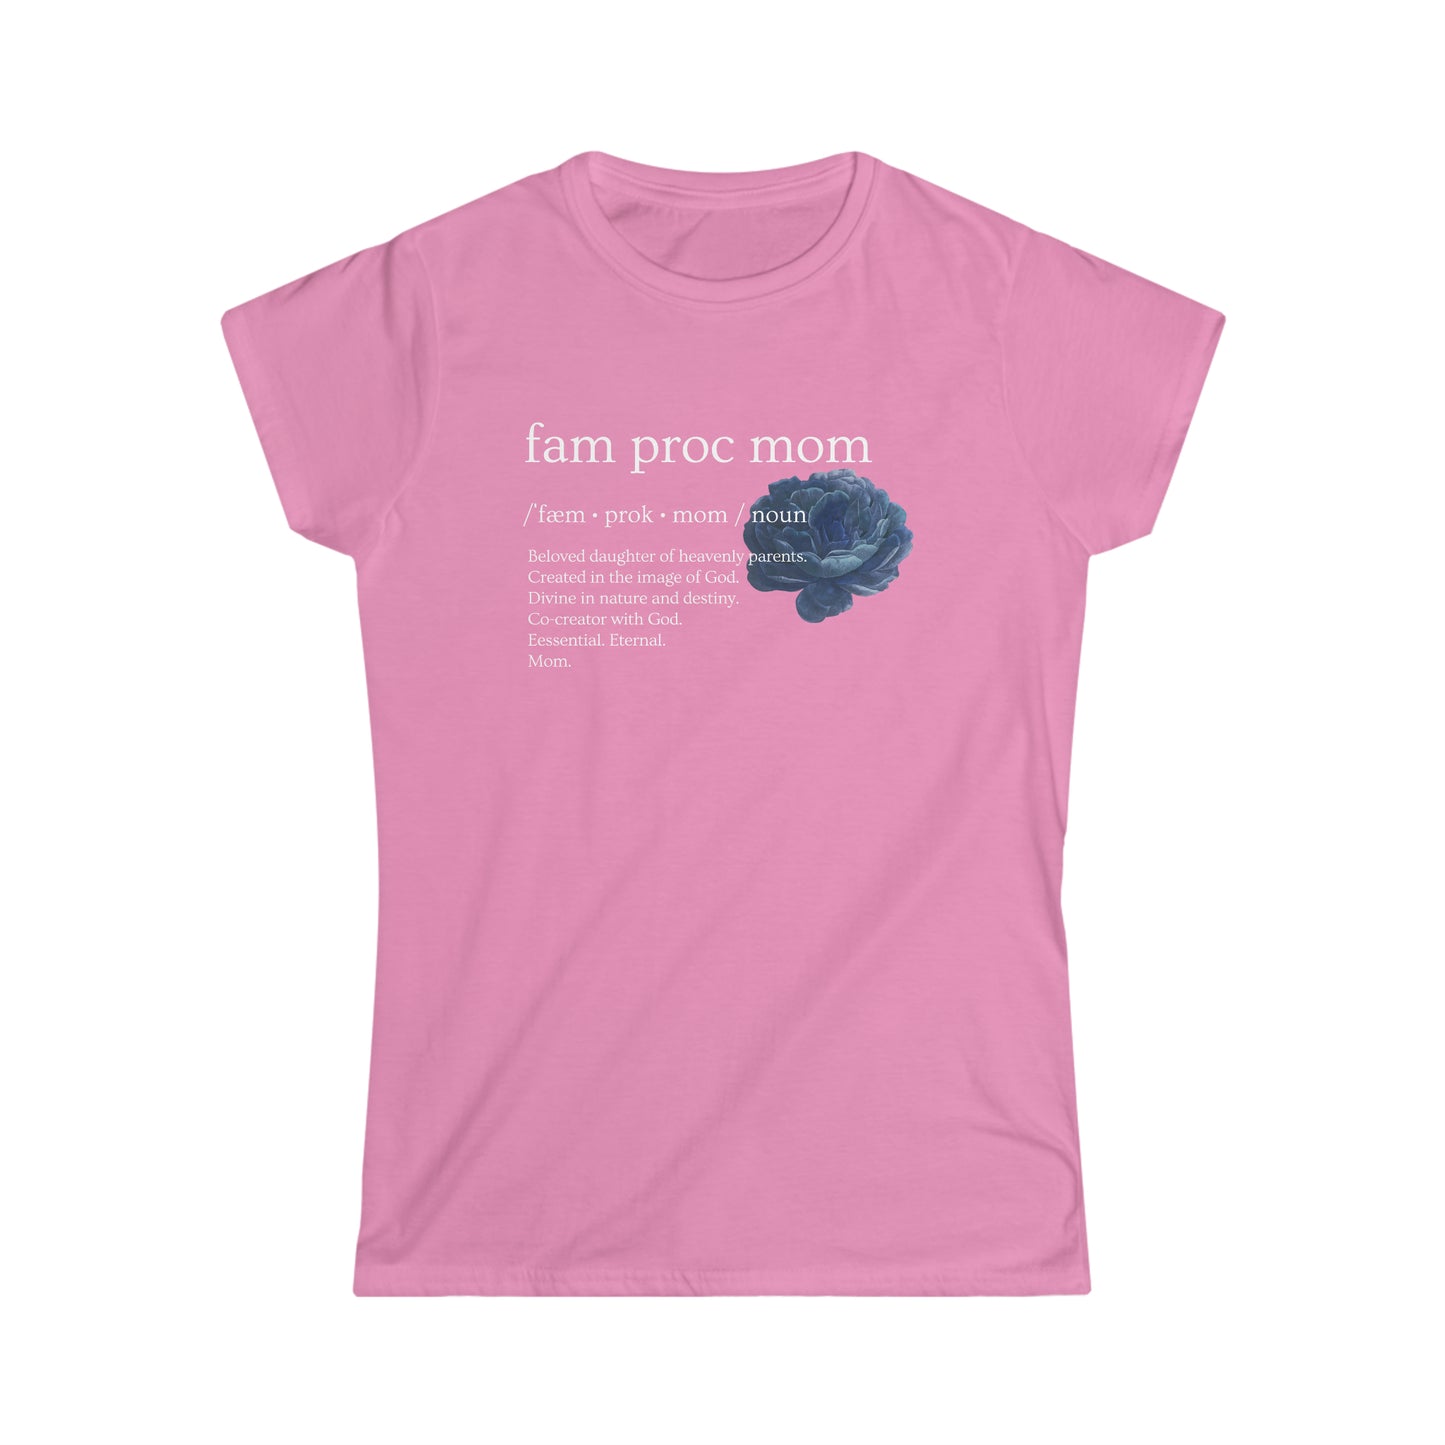 LDS Shirt for Moms - Family Proclamation Mom Cotton Softstyle T-Shirt